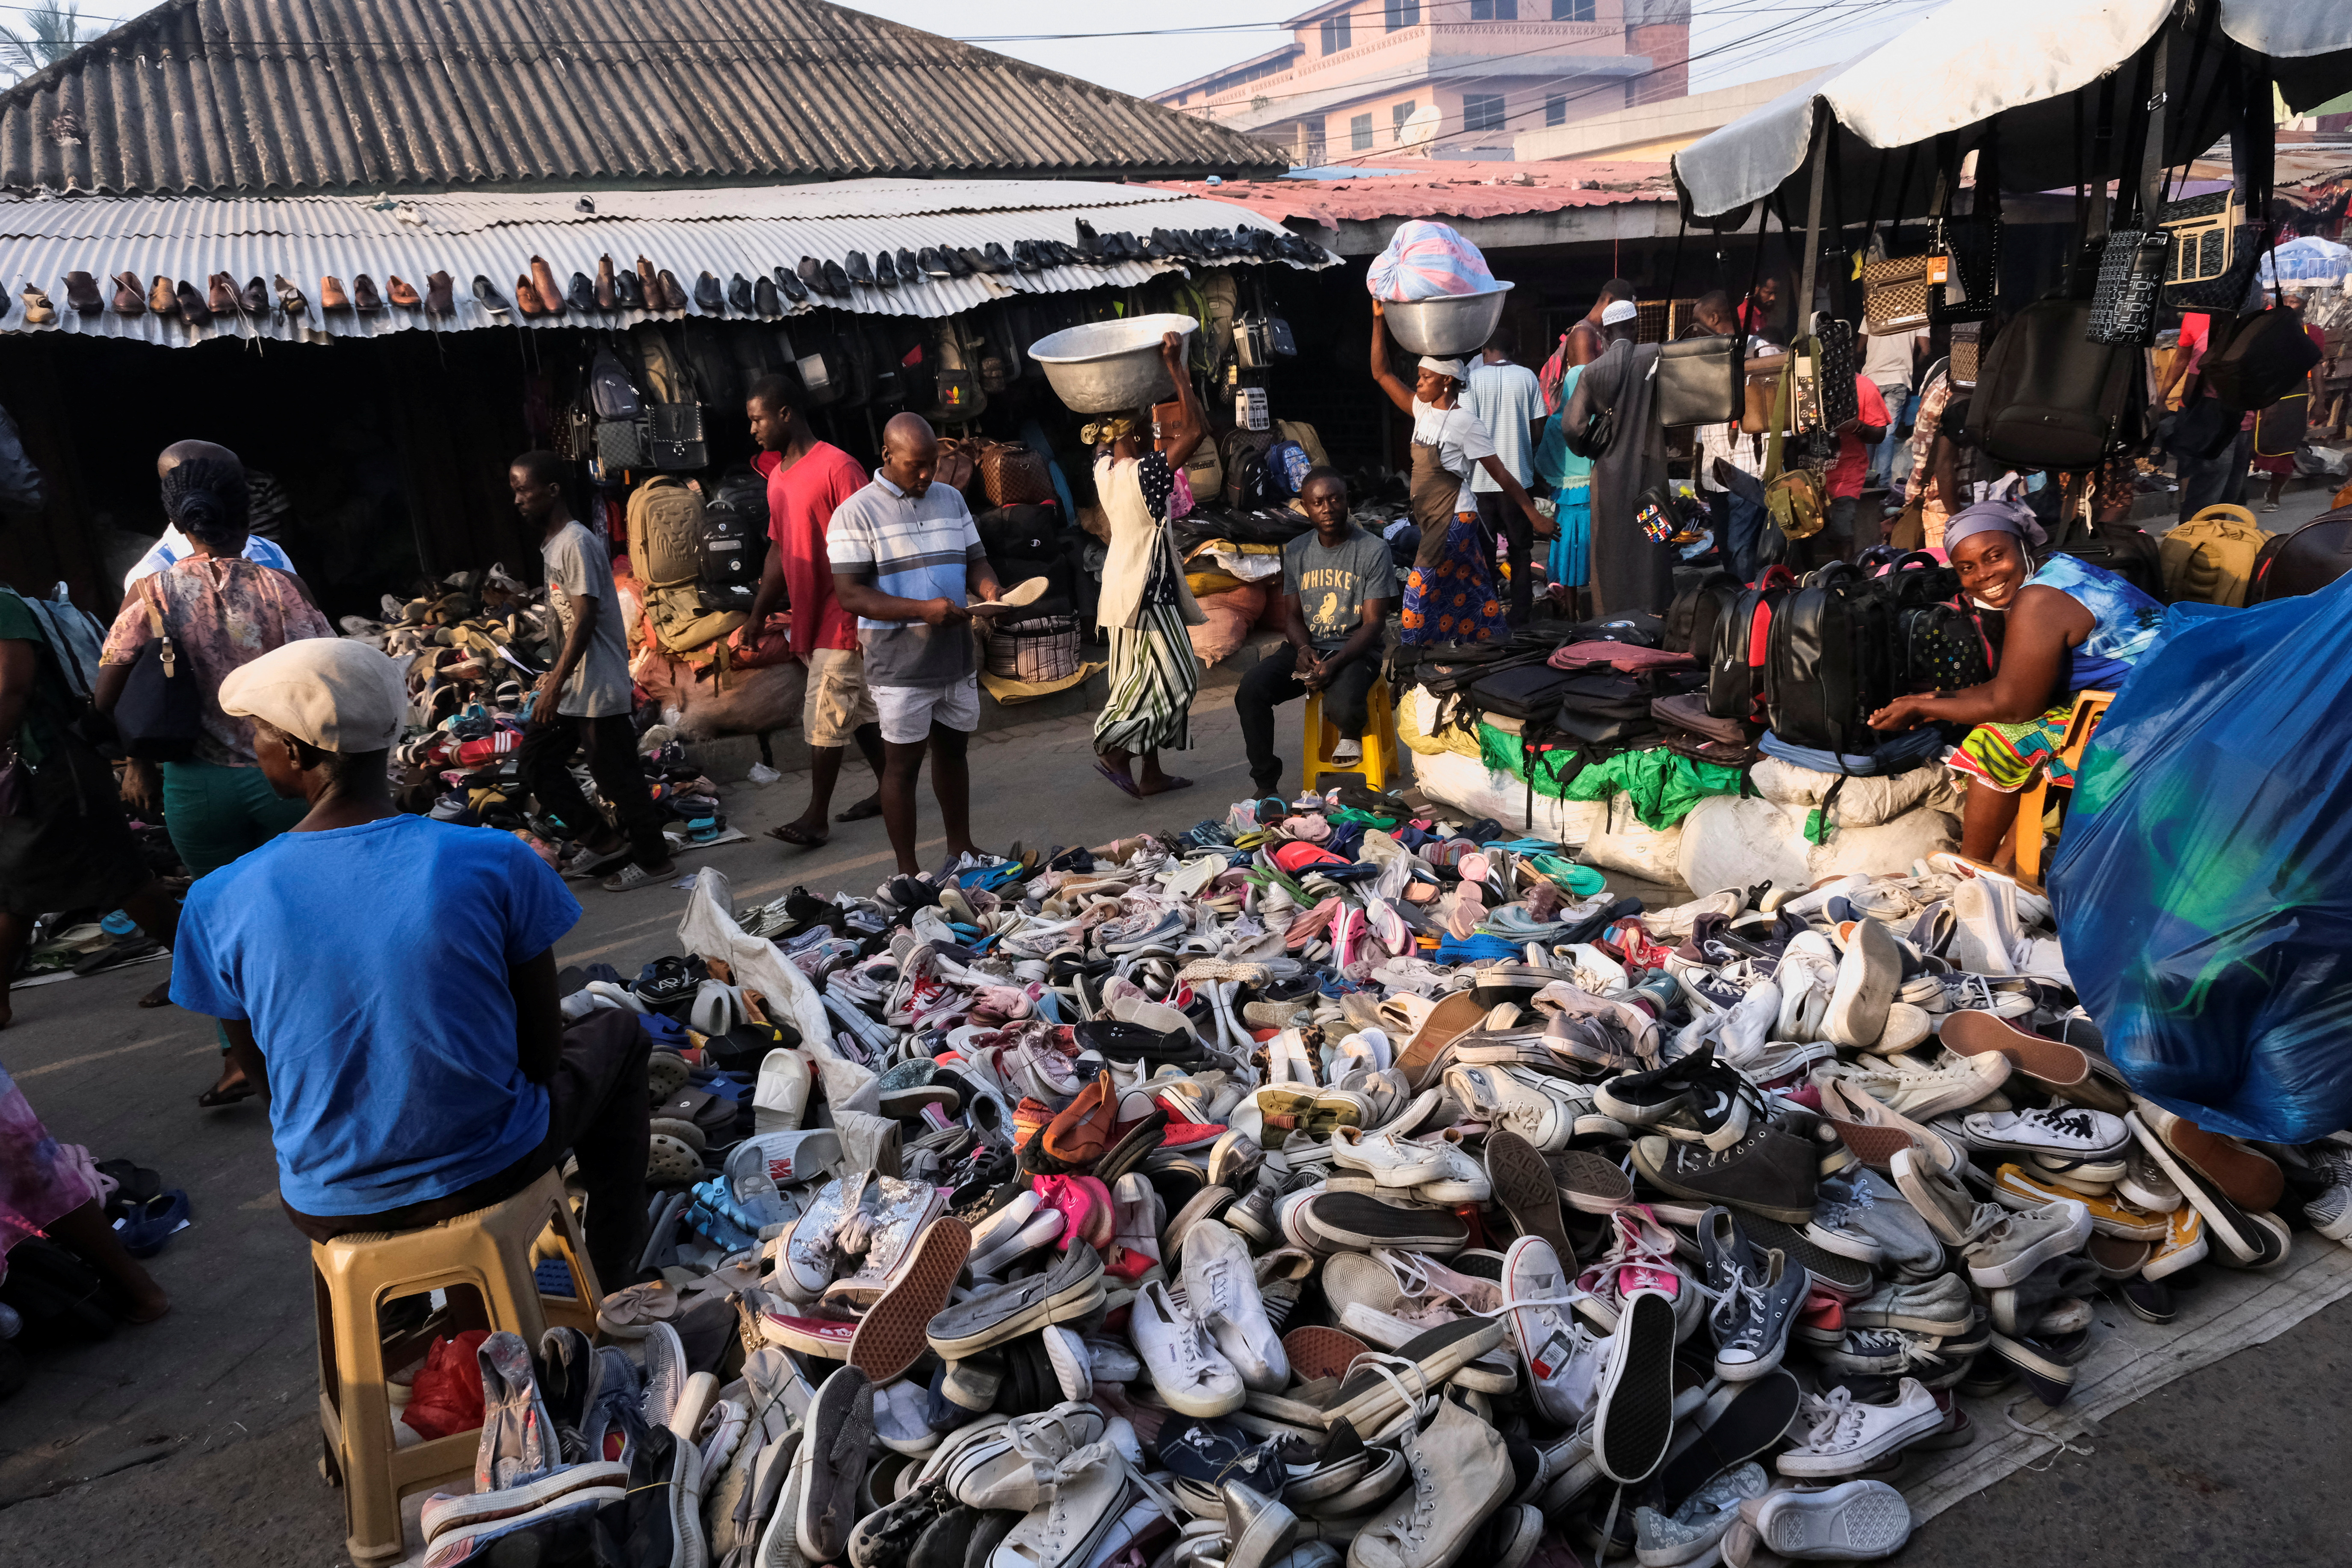 Kantamanto market in Accra, Ghana, which received 15 million new
garments a week